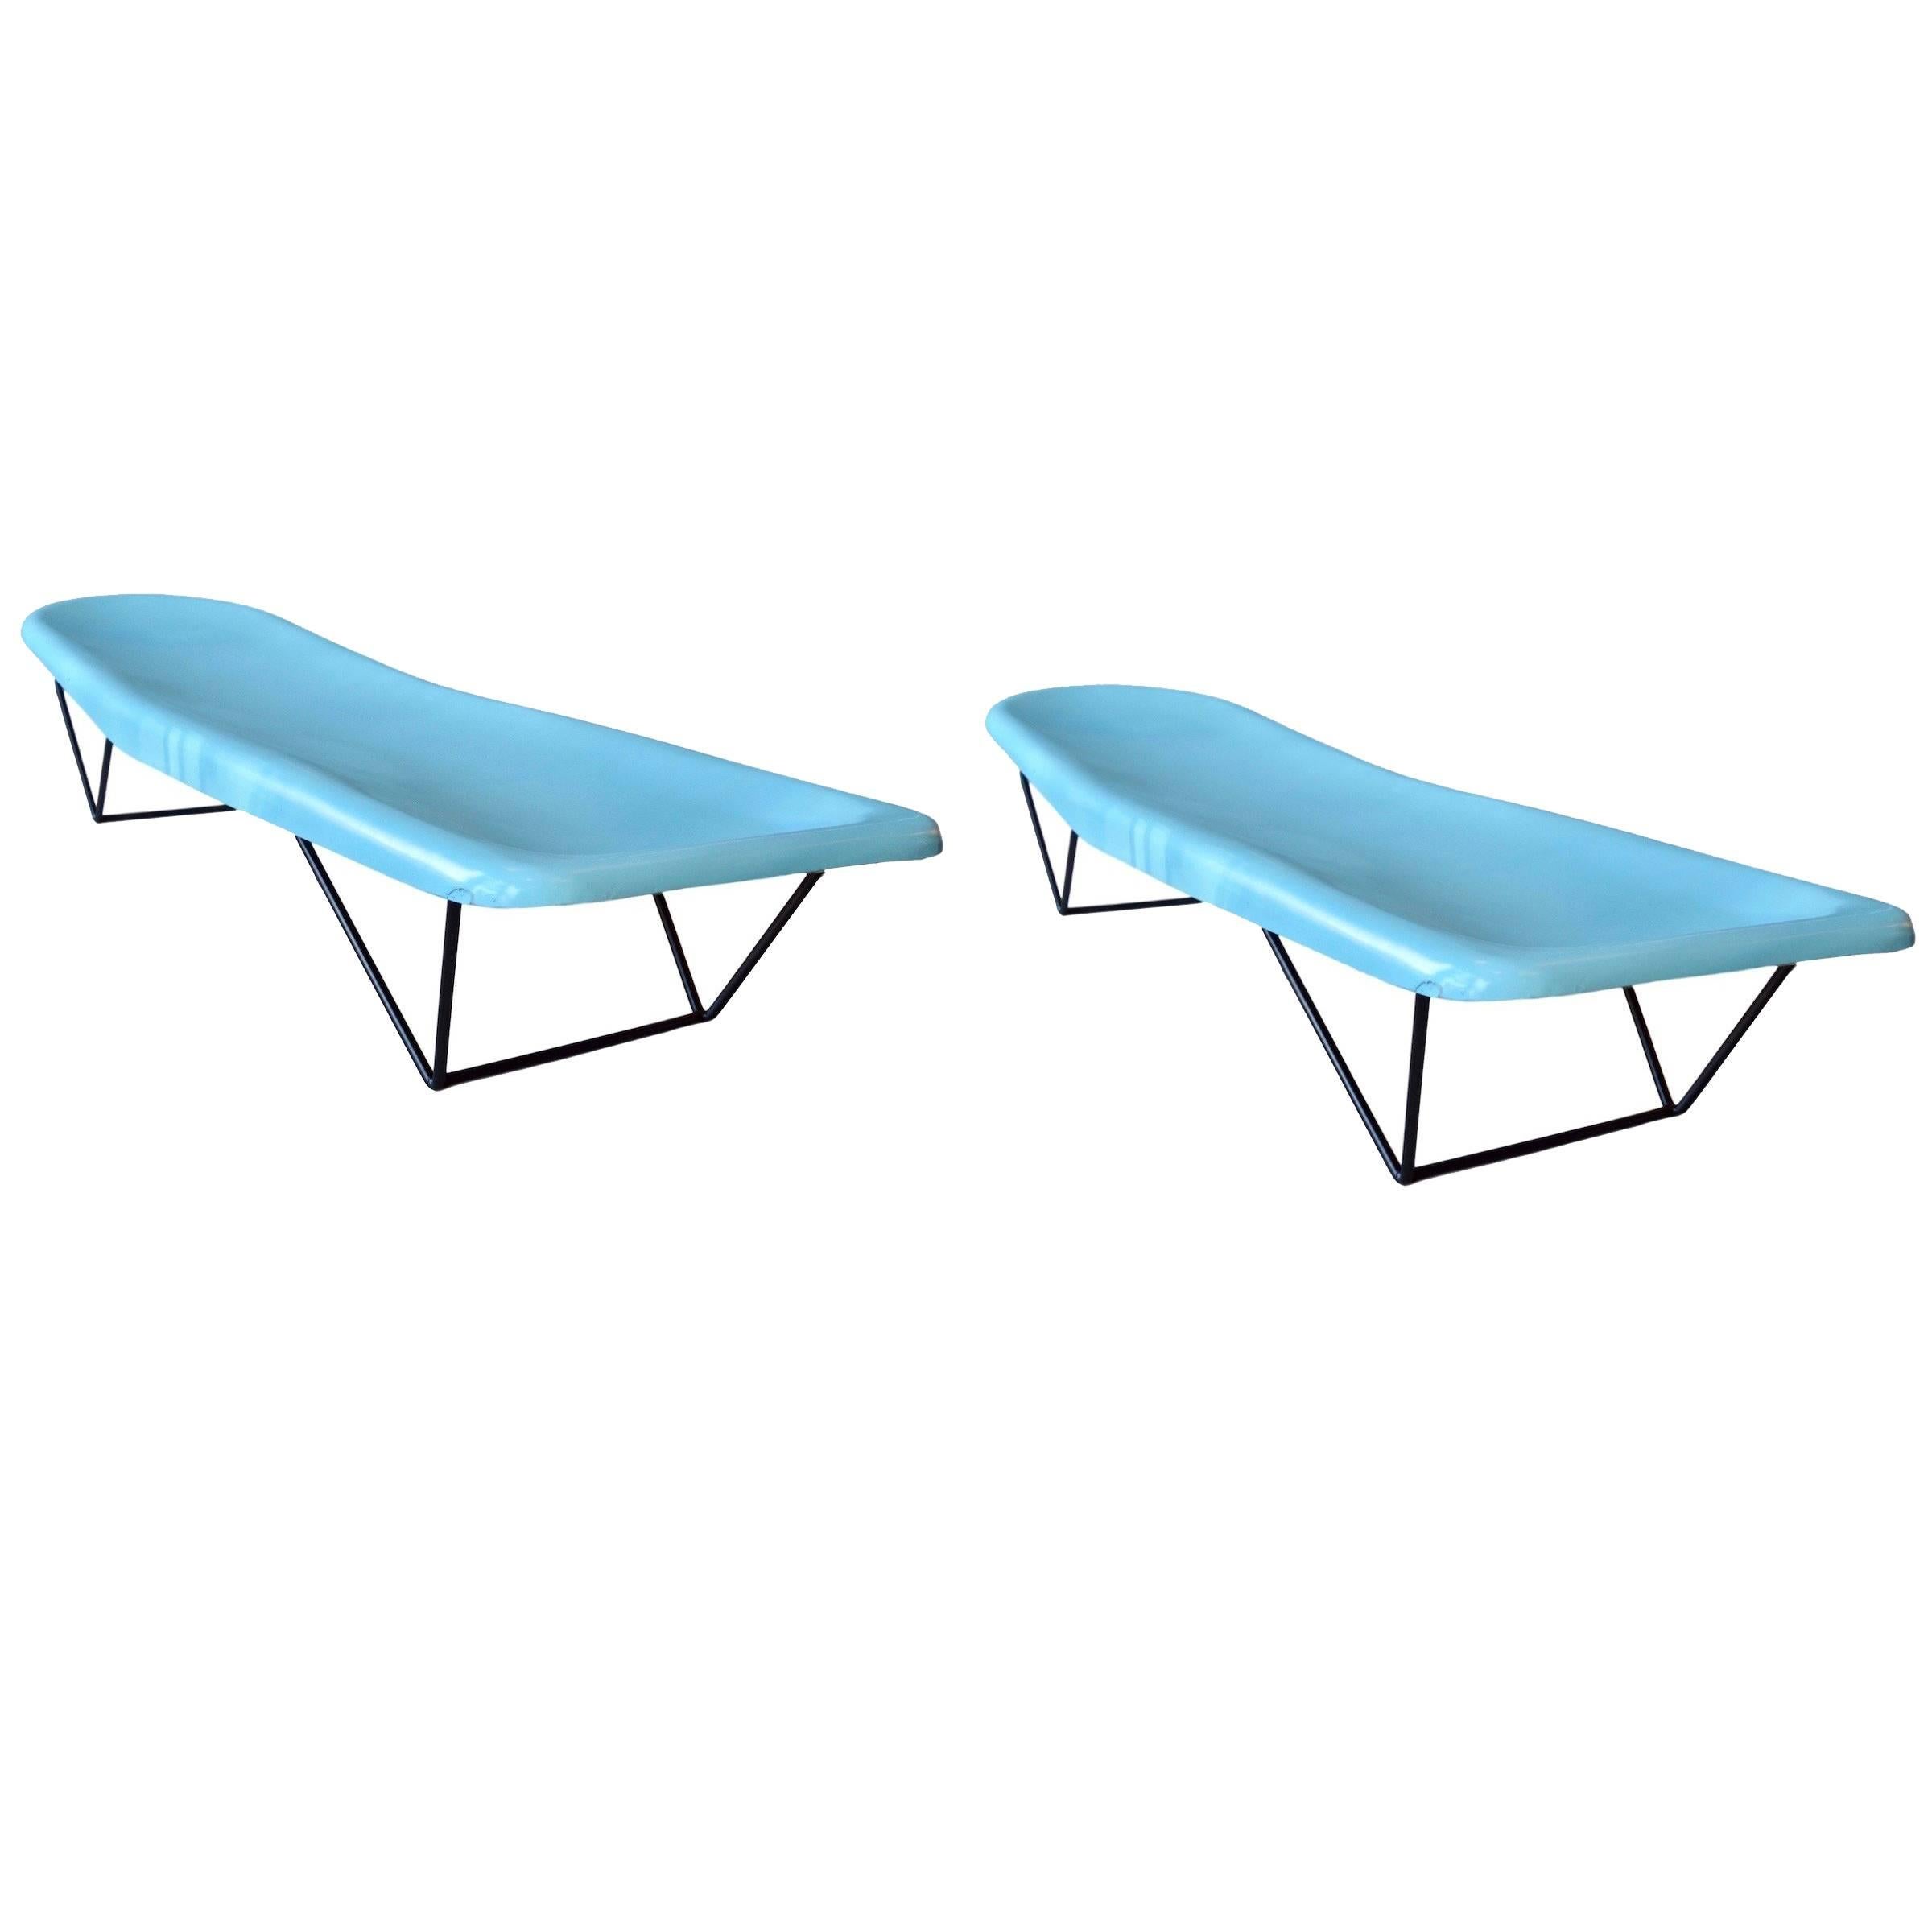 Pair of Vintage Fibreglass and Iron Poolside Lounge Chairs by Fibrella